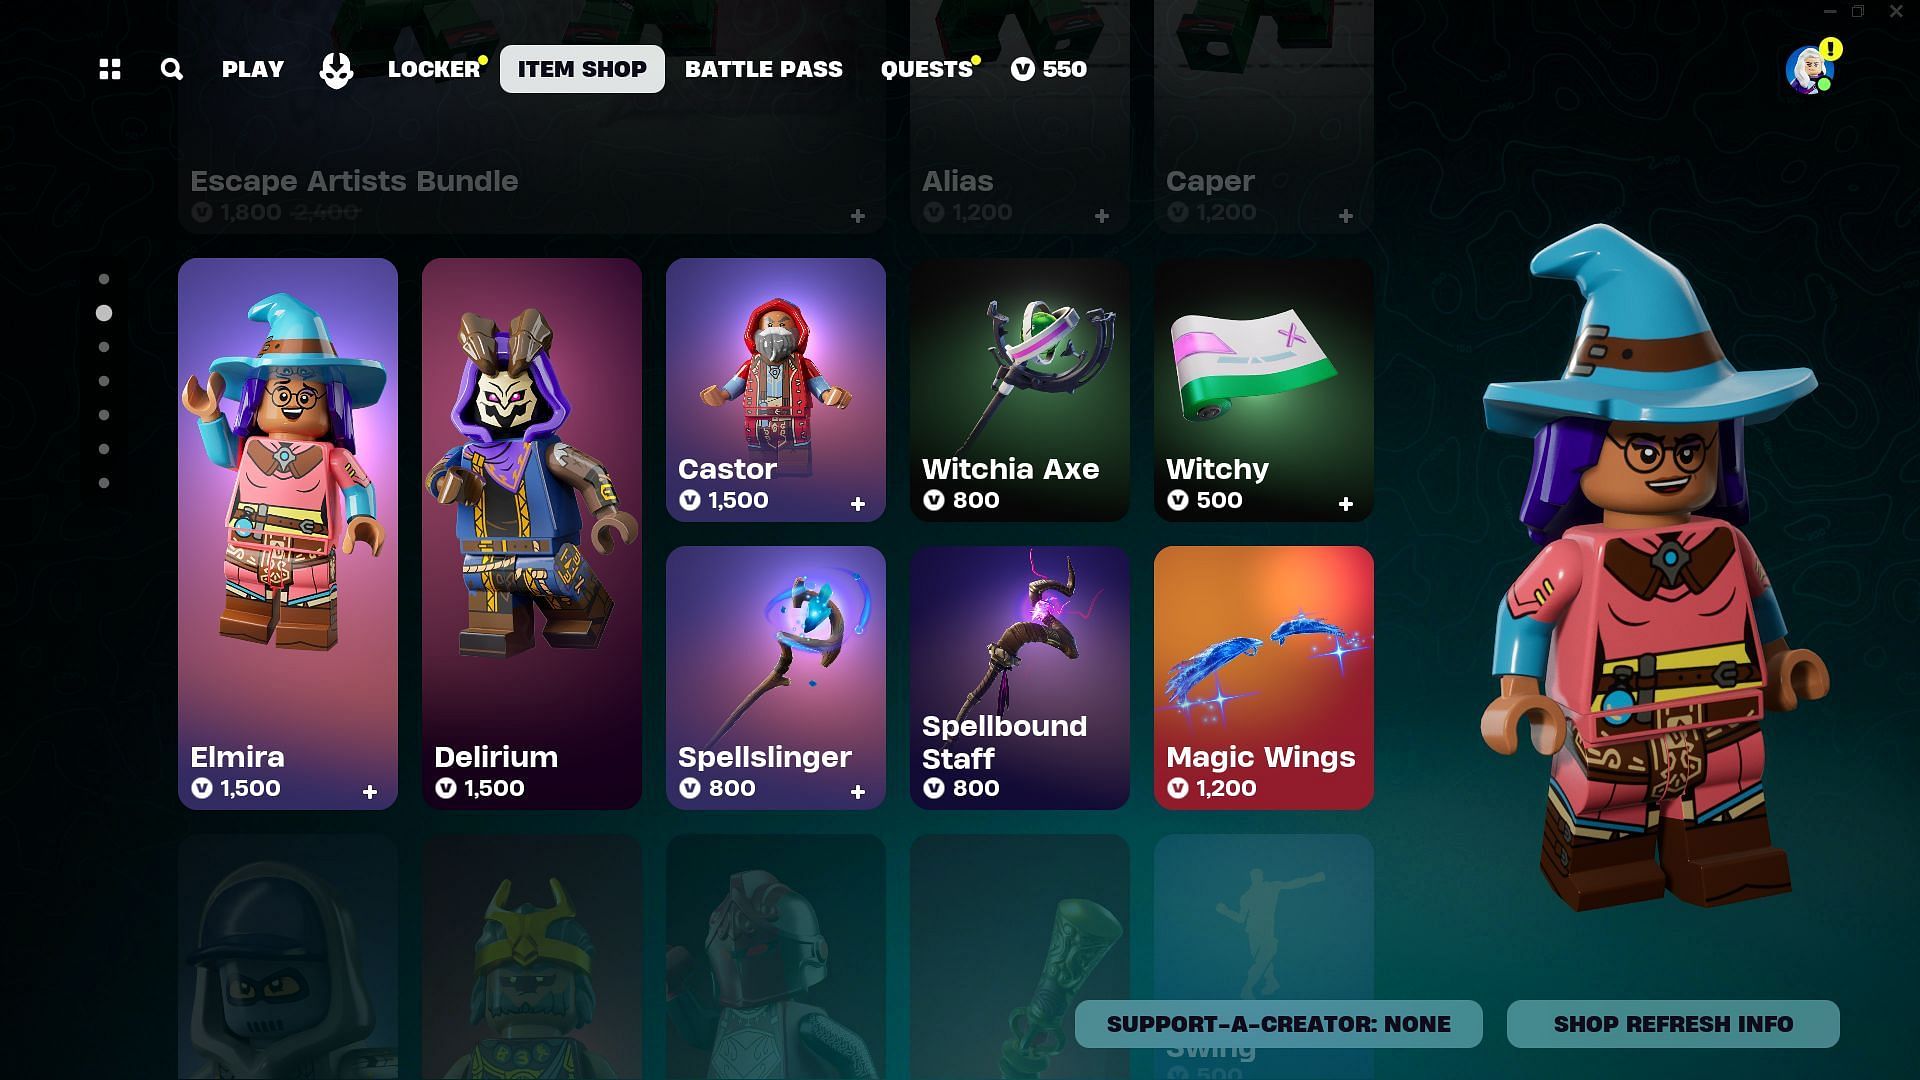 Castor, Elmira, and Delirium skins are currently listed in the Item Shop (Image via Epic Games)